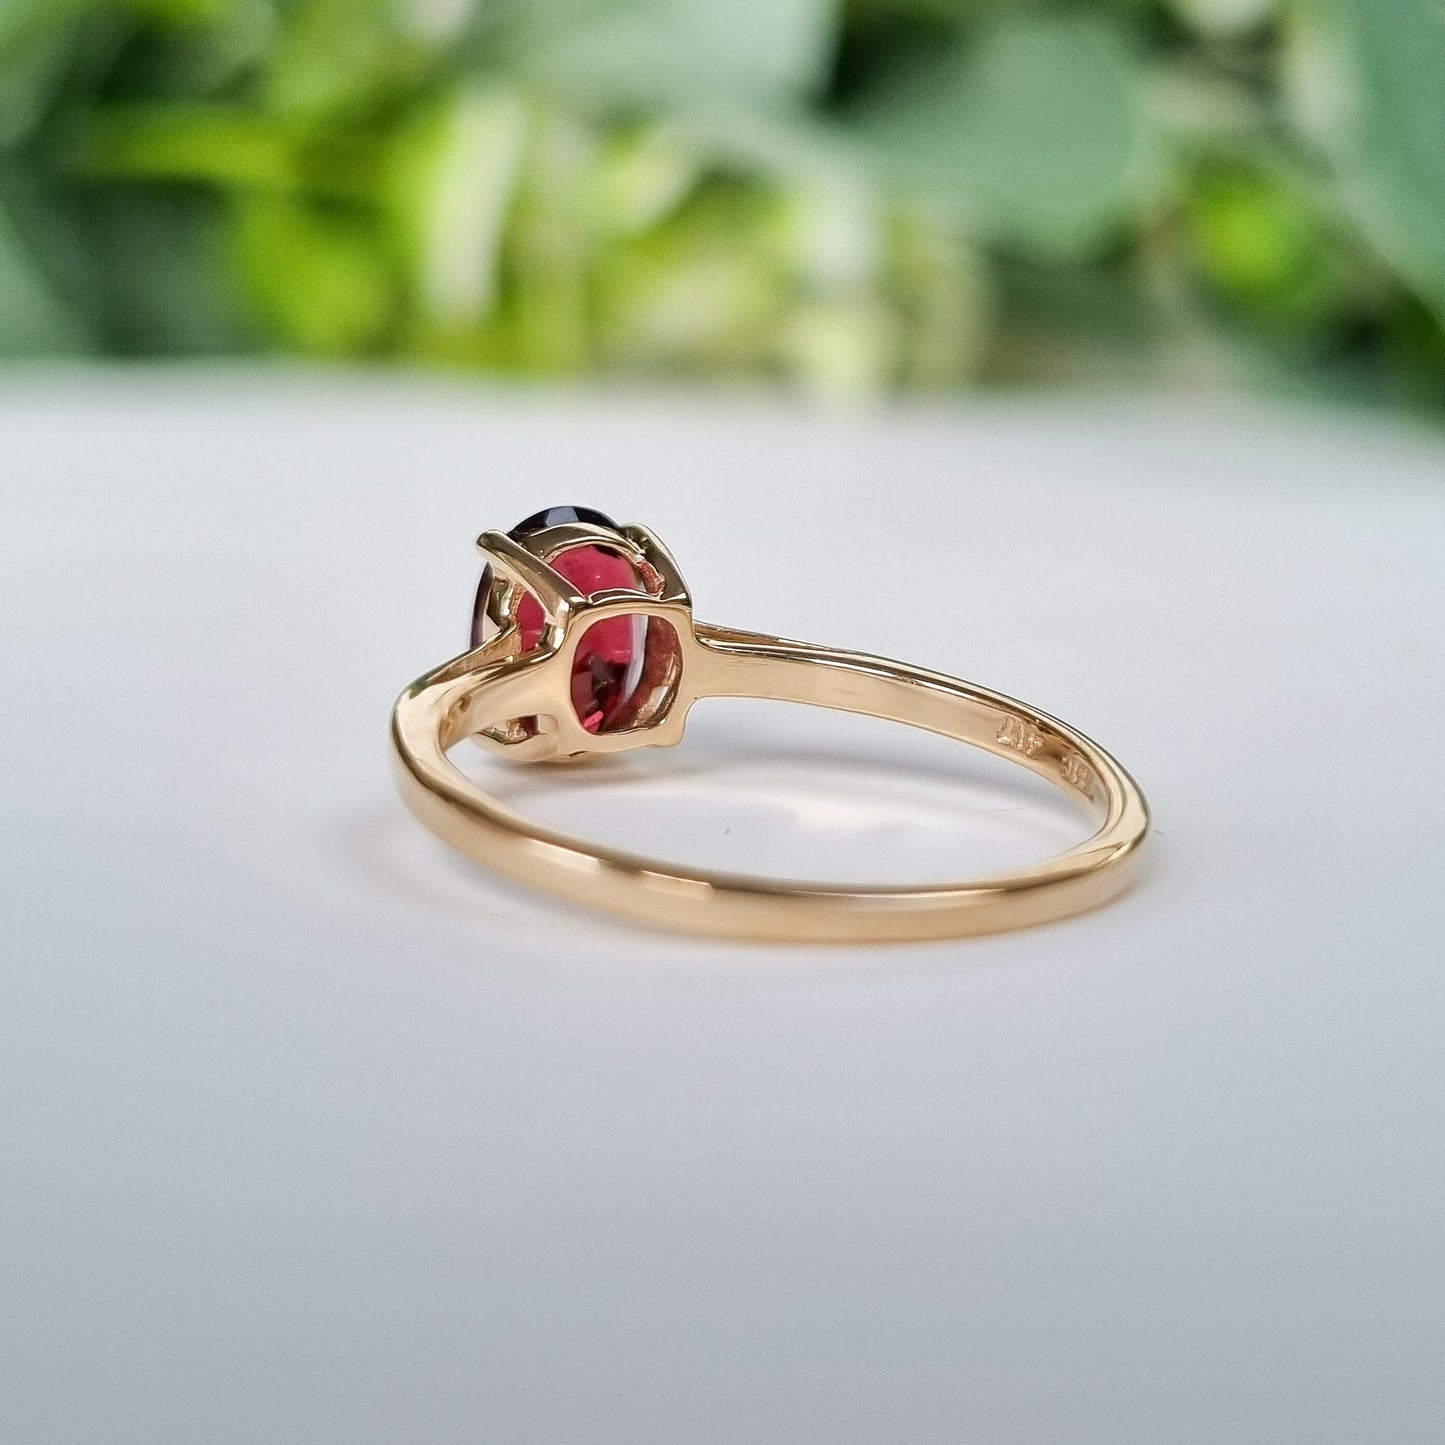 Vintage 9ct Yellow Gold Red Spinel Solitaire Ring